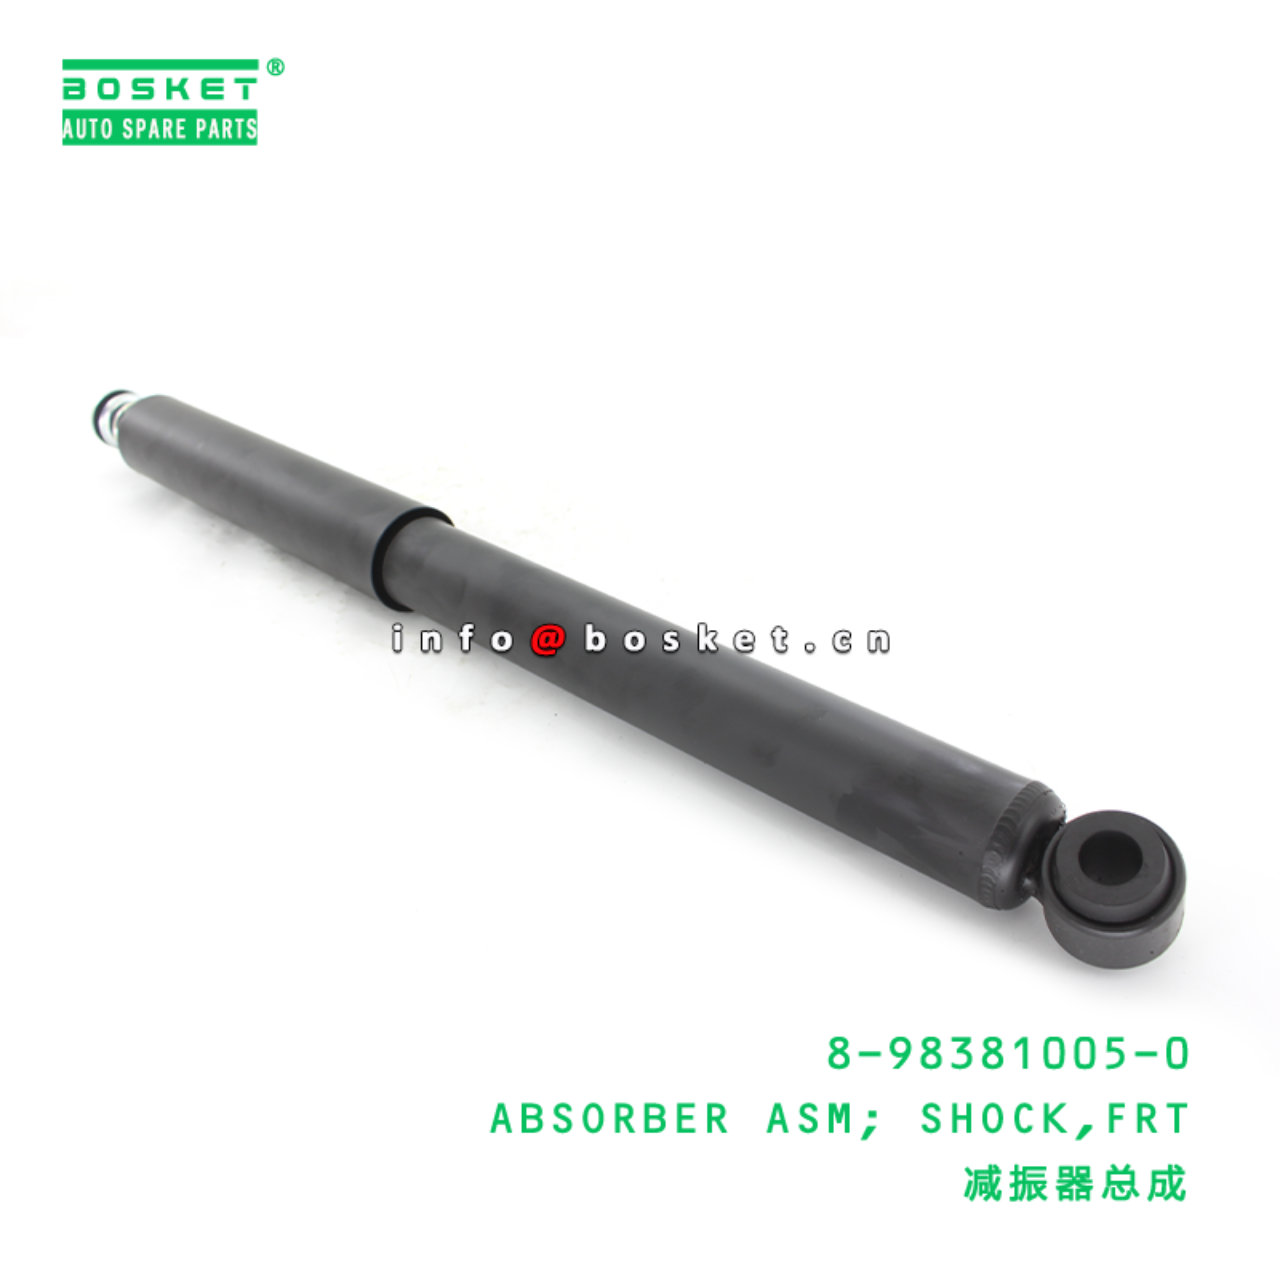 8-98381005-0 Front Shock Absorber Assembly Suitable for ISUZU NPR 8983810050